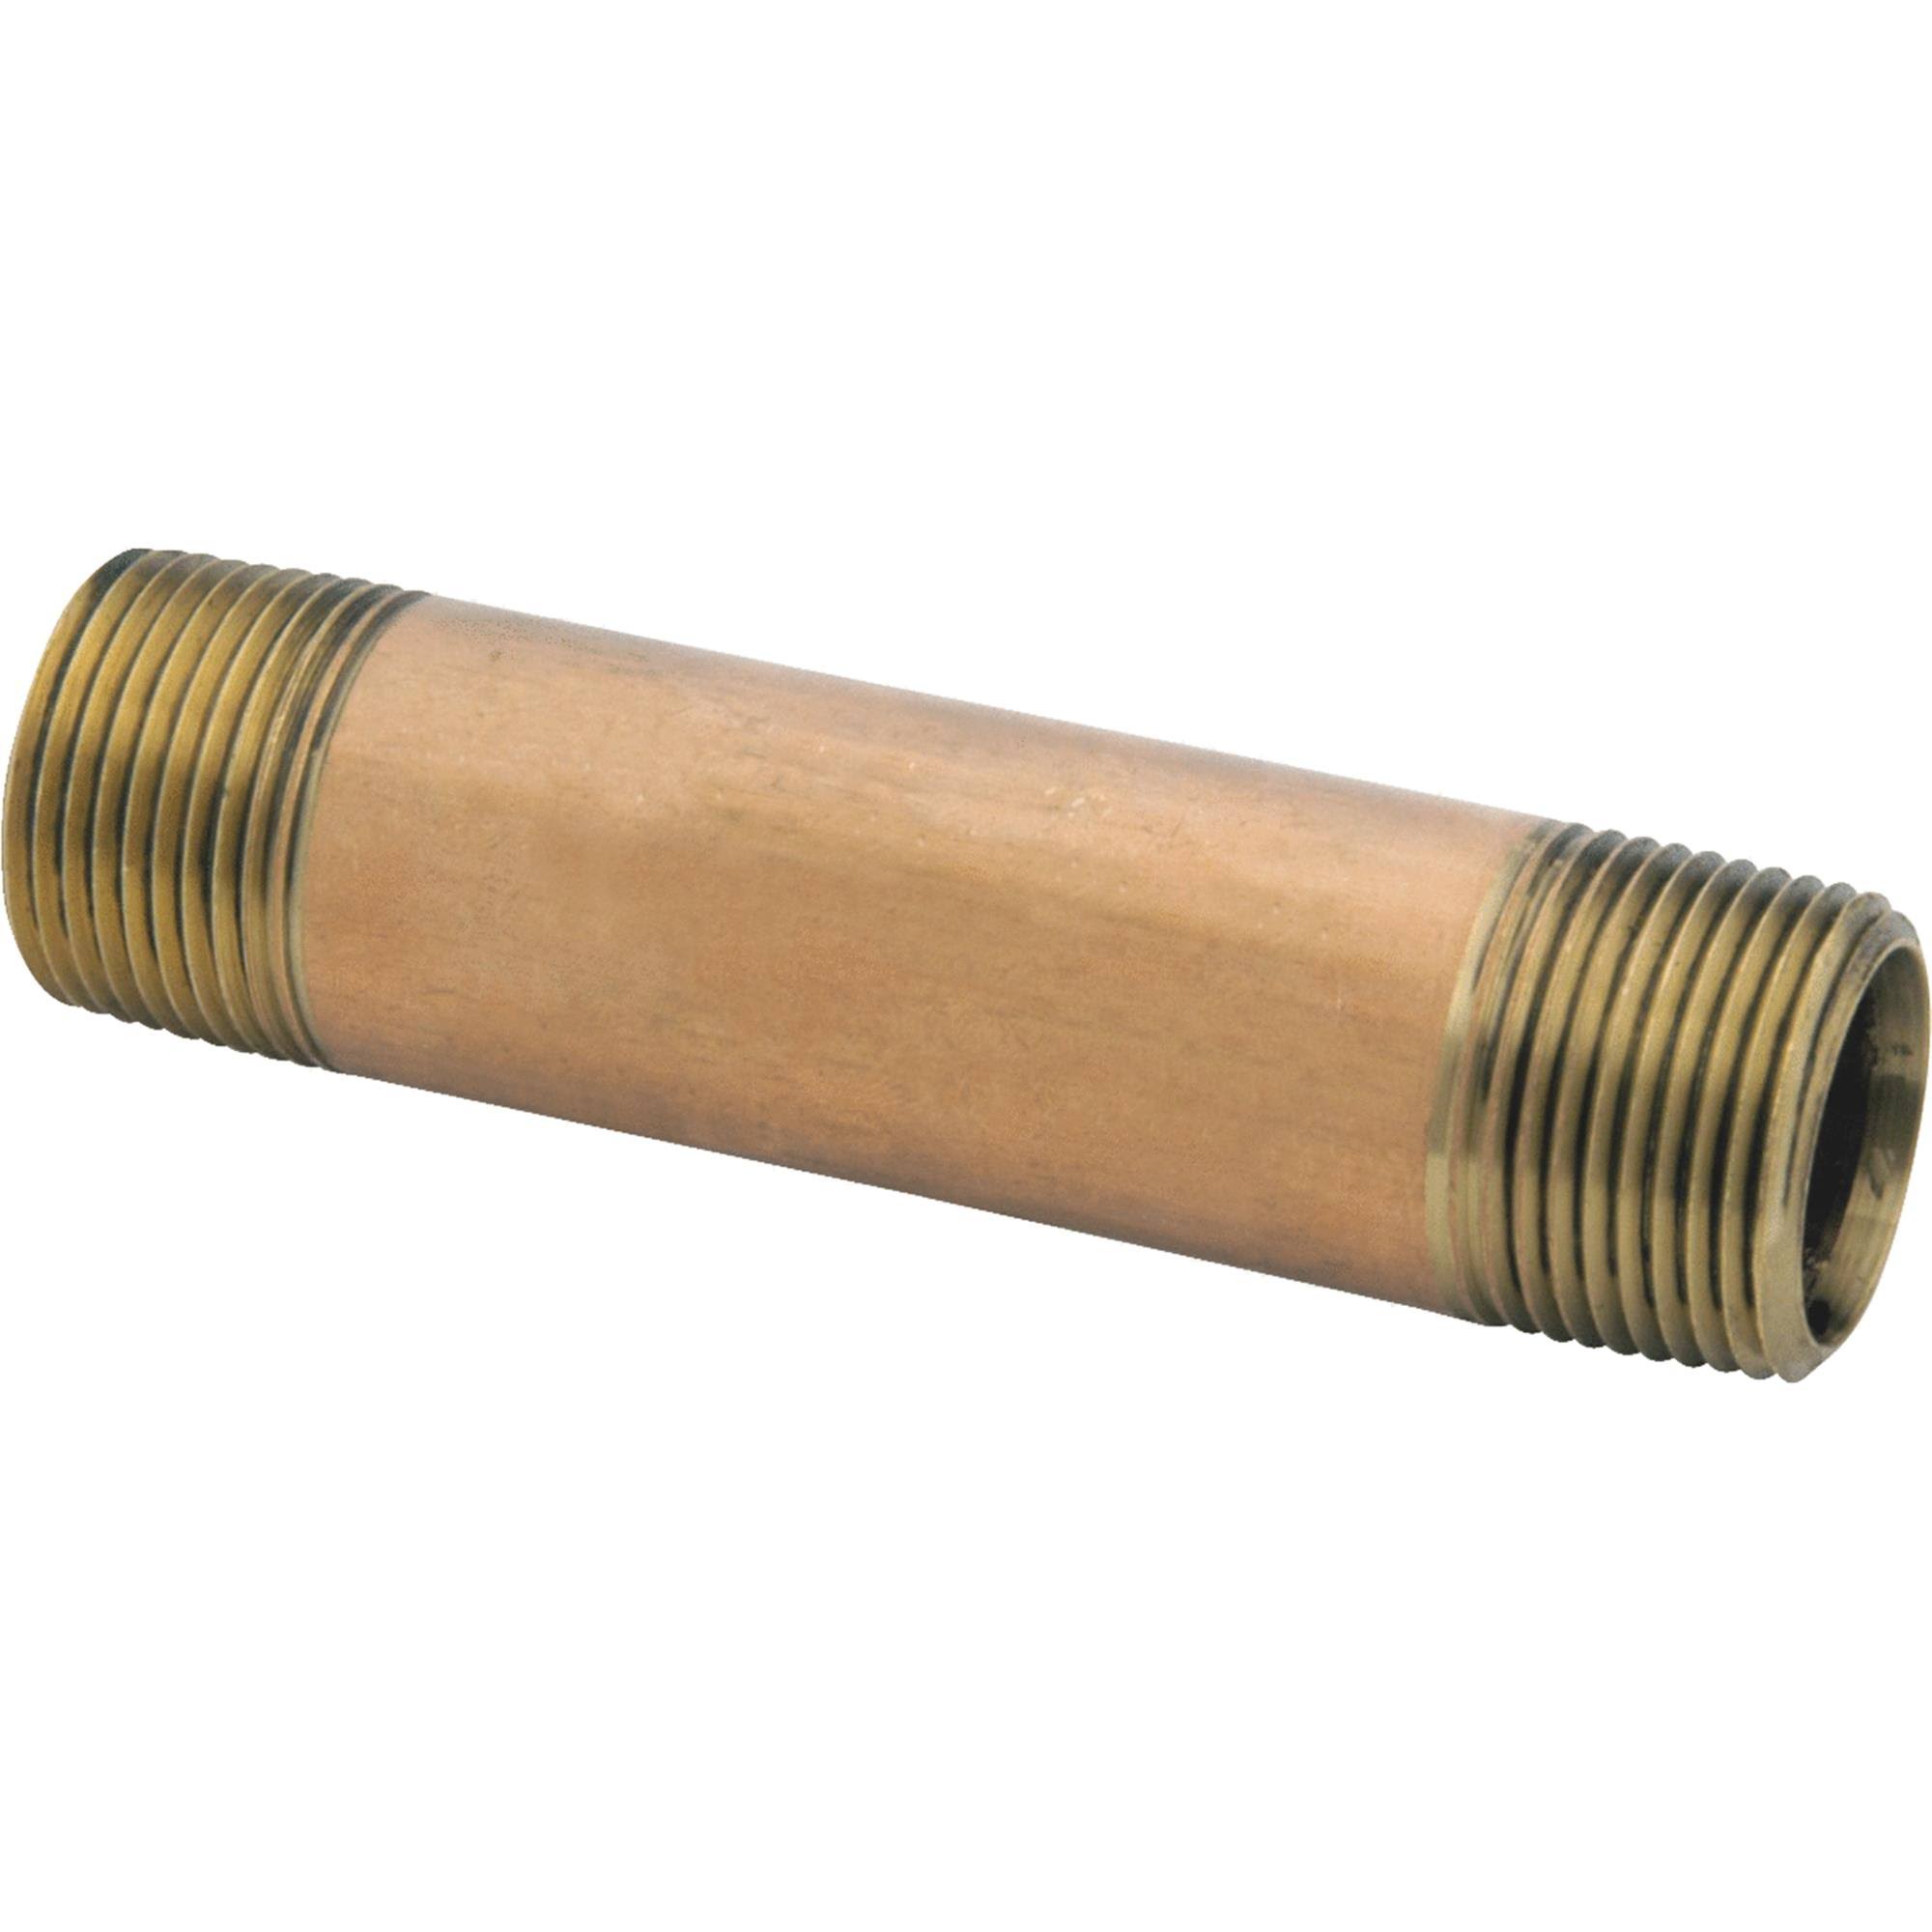 Anderson Metal Pipe 38300-0230 Nipple - Red Brass, 1/8" x 3"